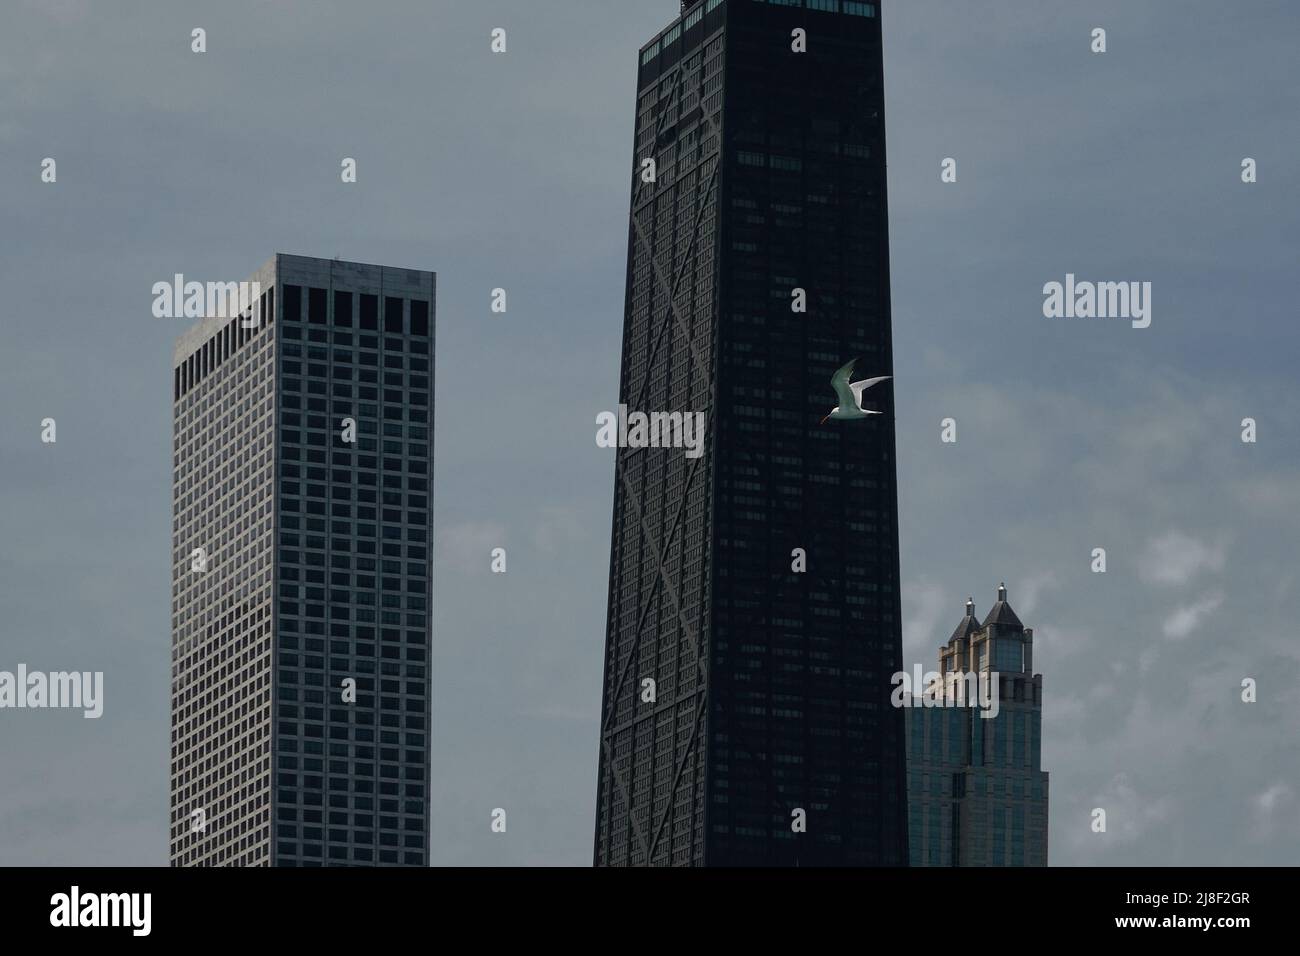 seagull flying overhead with buildings in the background Stock Photo